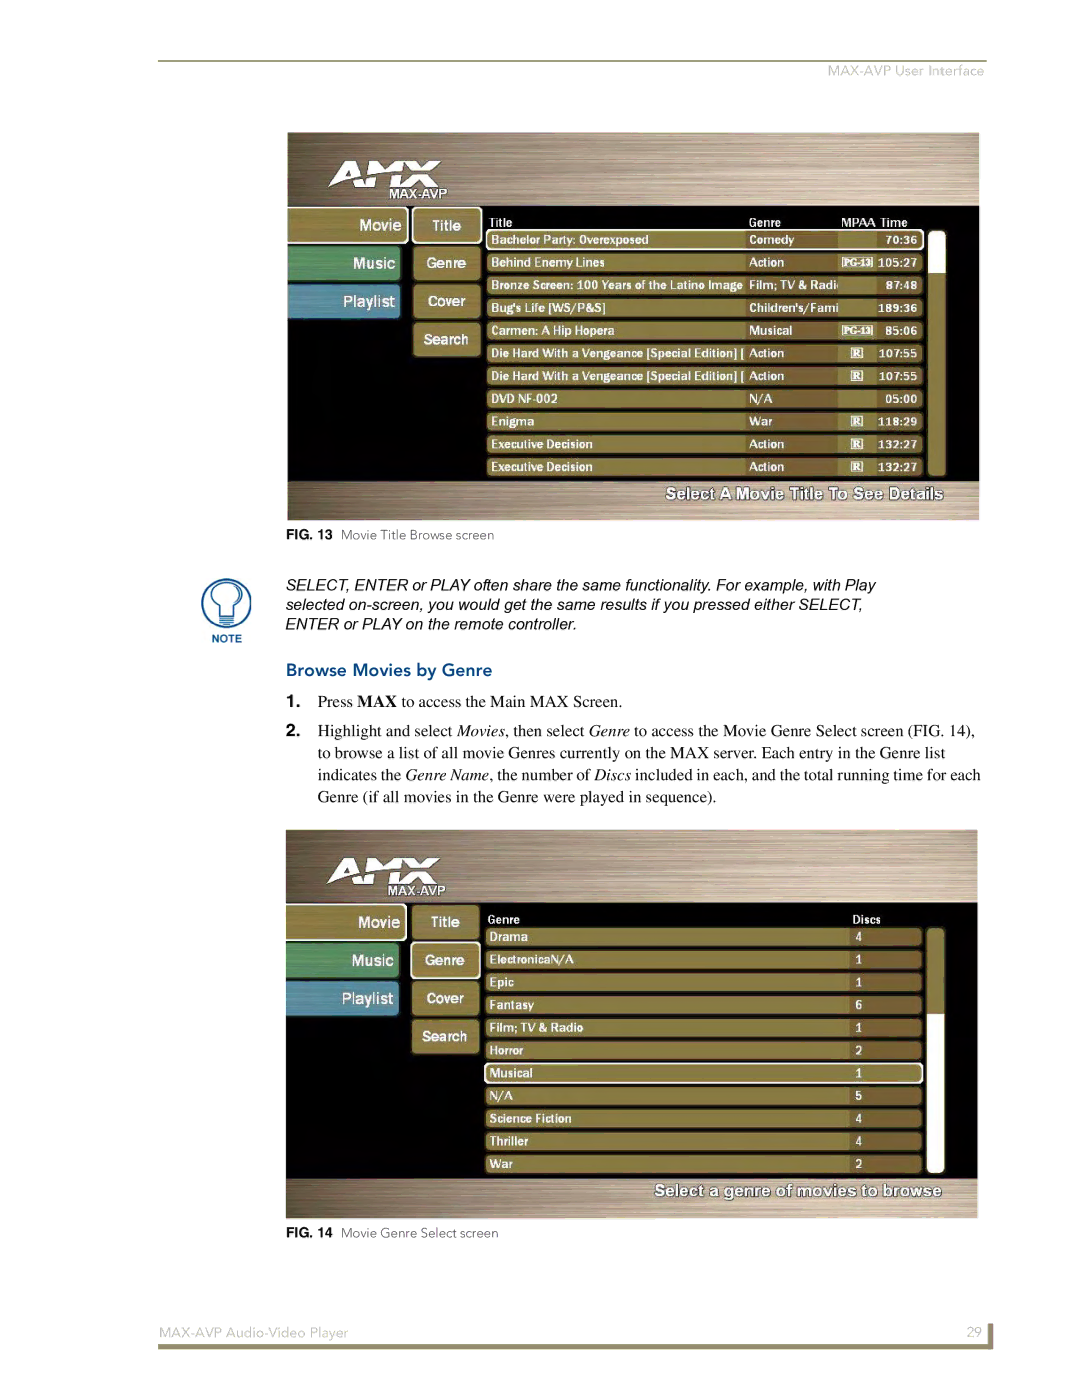 Arkon MAX-AVP manual Browse Movies by Genre, Movie Title Browse screen 